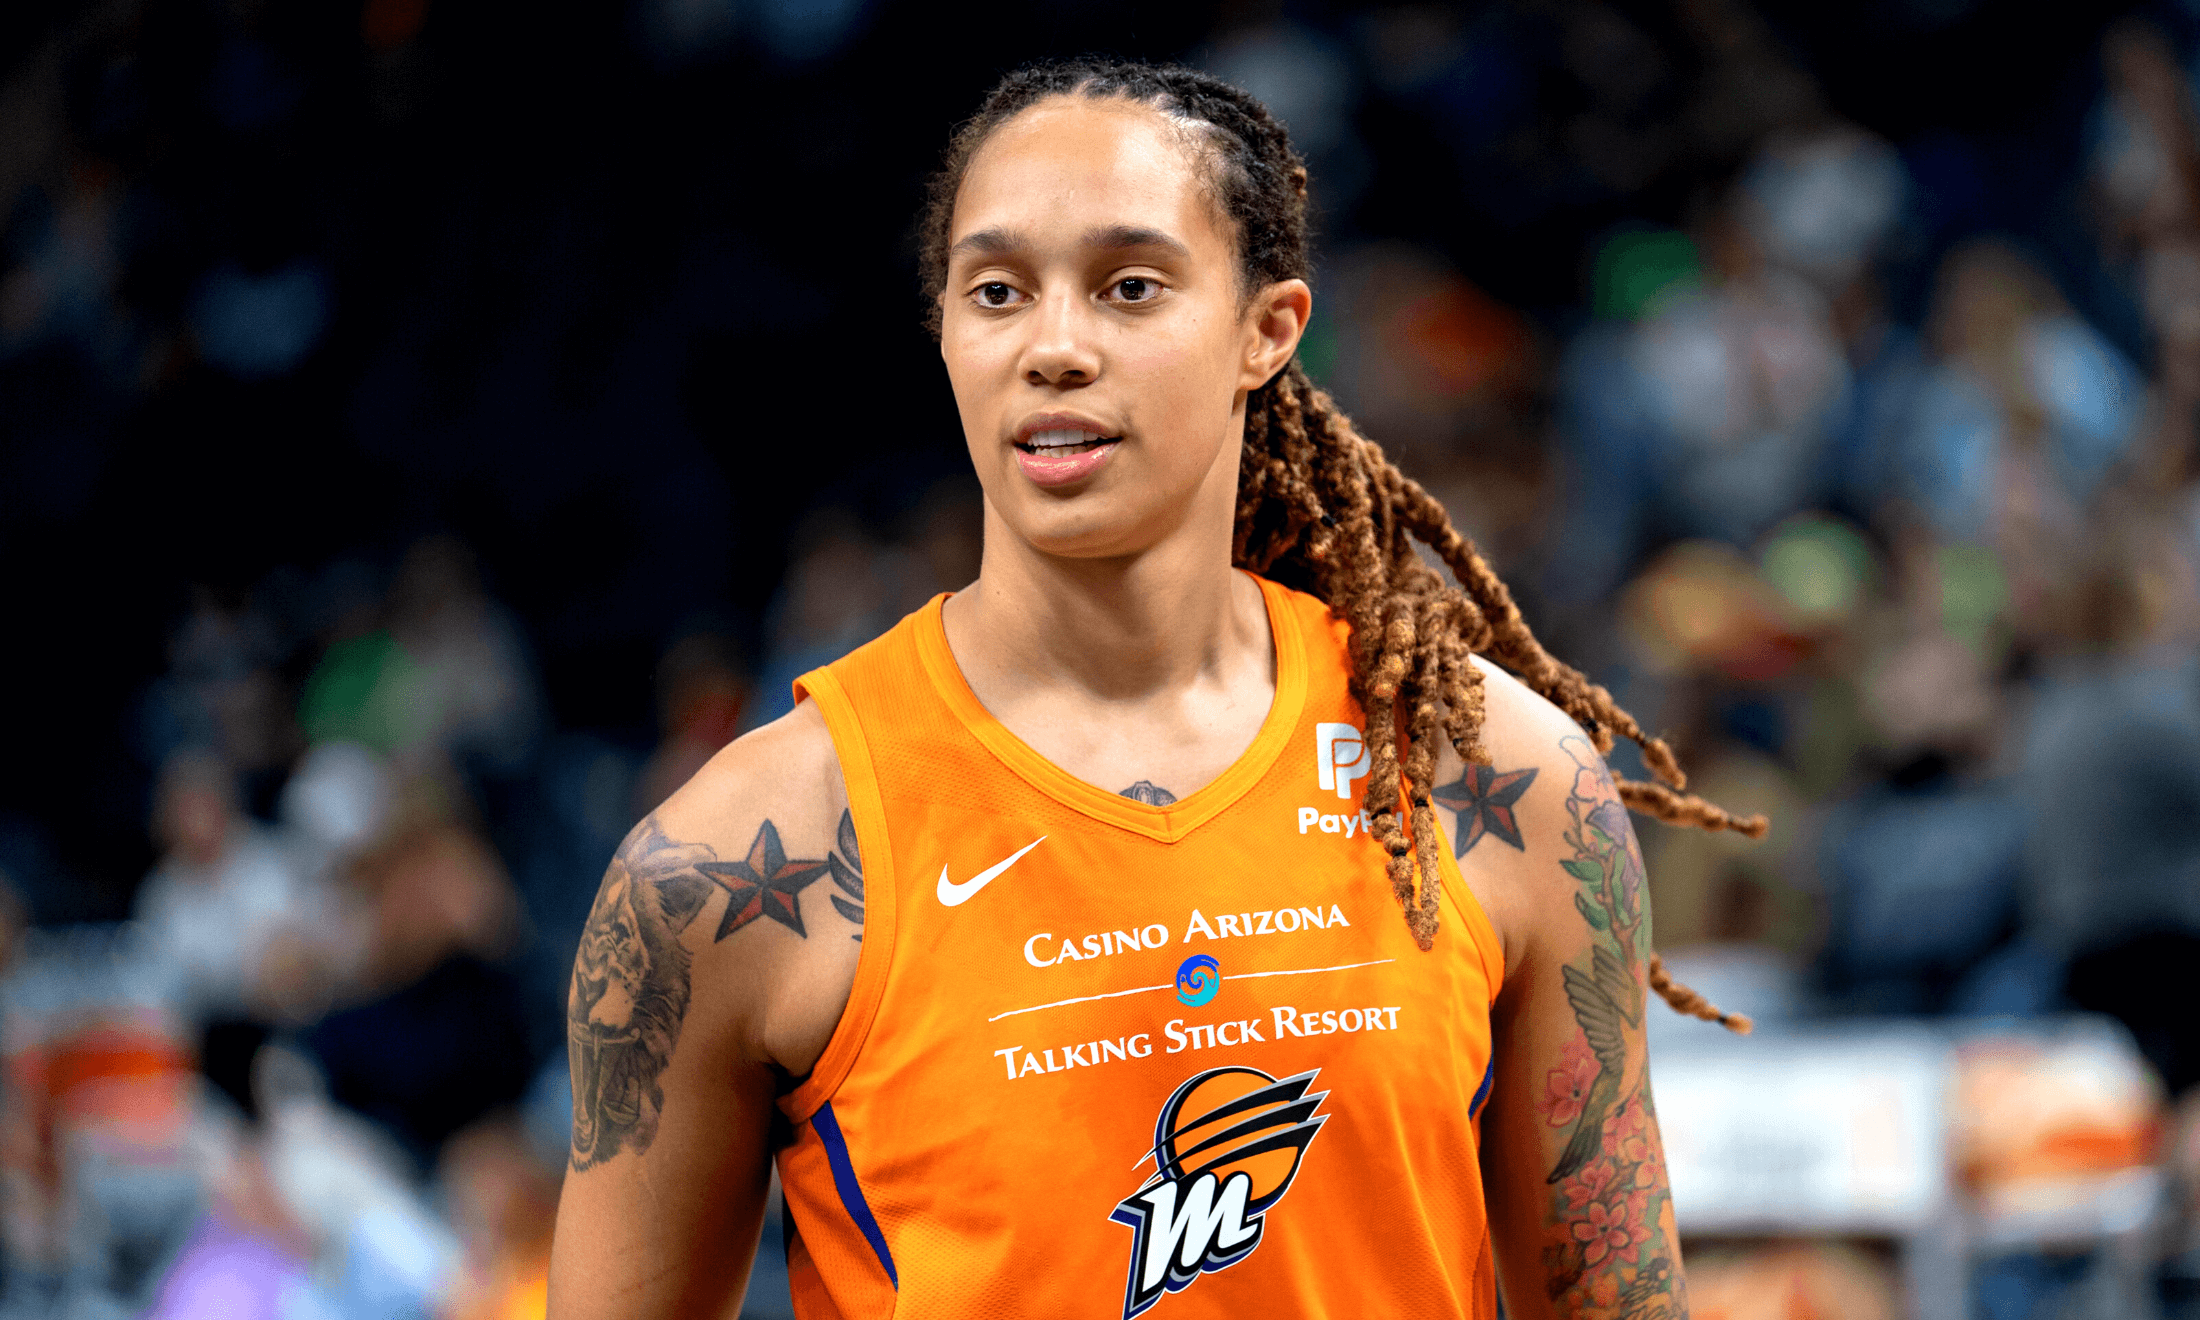 It’s been 200 days. What’s happening to Brittney Griner?